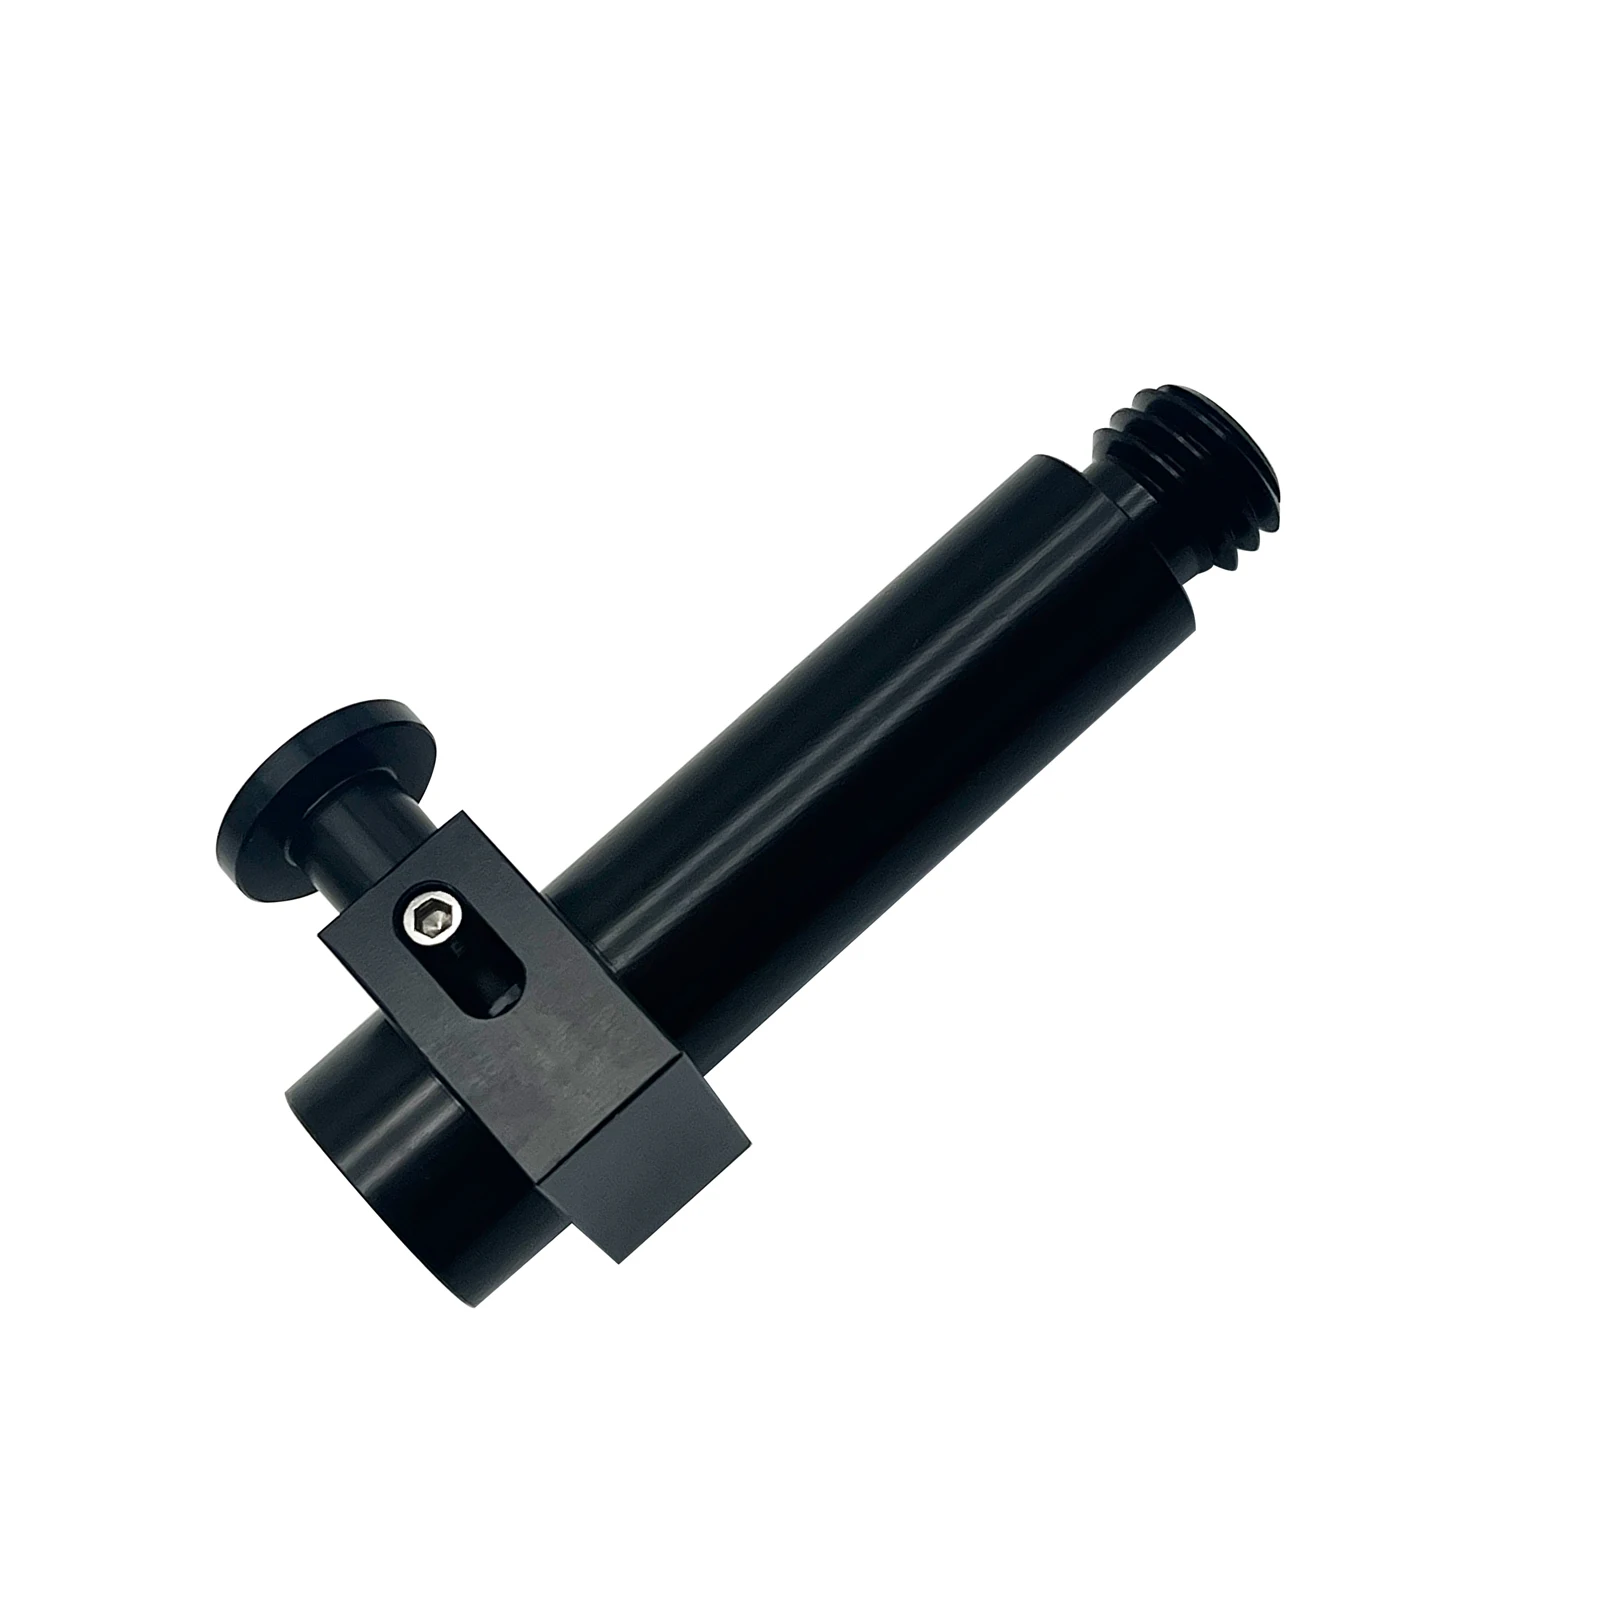 QUICK RELEASE ADAPTER KIT FOR PRISM POLE GPS SURVEYING SECO/TOPCON/TRIMBLE/LEICA 